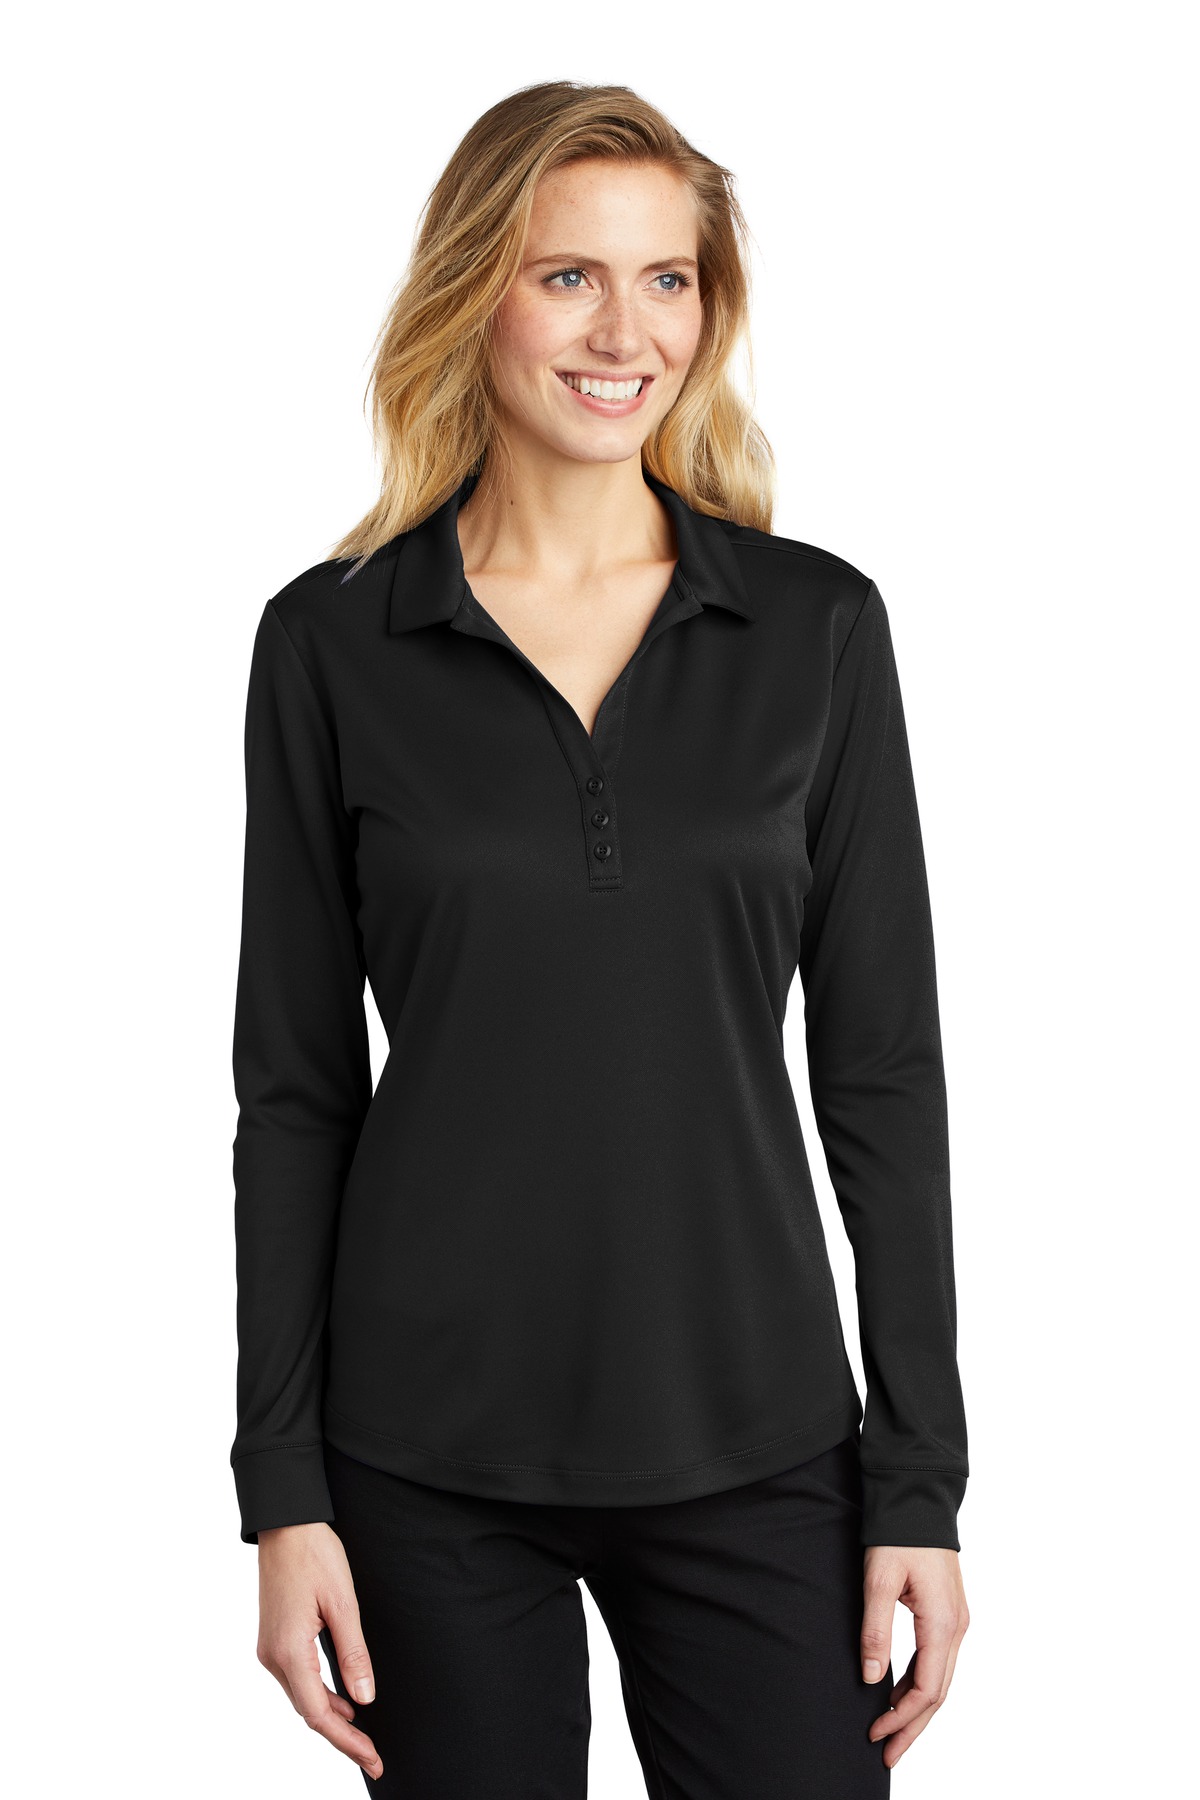 Port Authority Ladies Polos& Knits for Corporate Hospitality ® Ladies Silk Touch Performance Long Sleeve Polo.-Port Authority